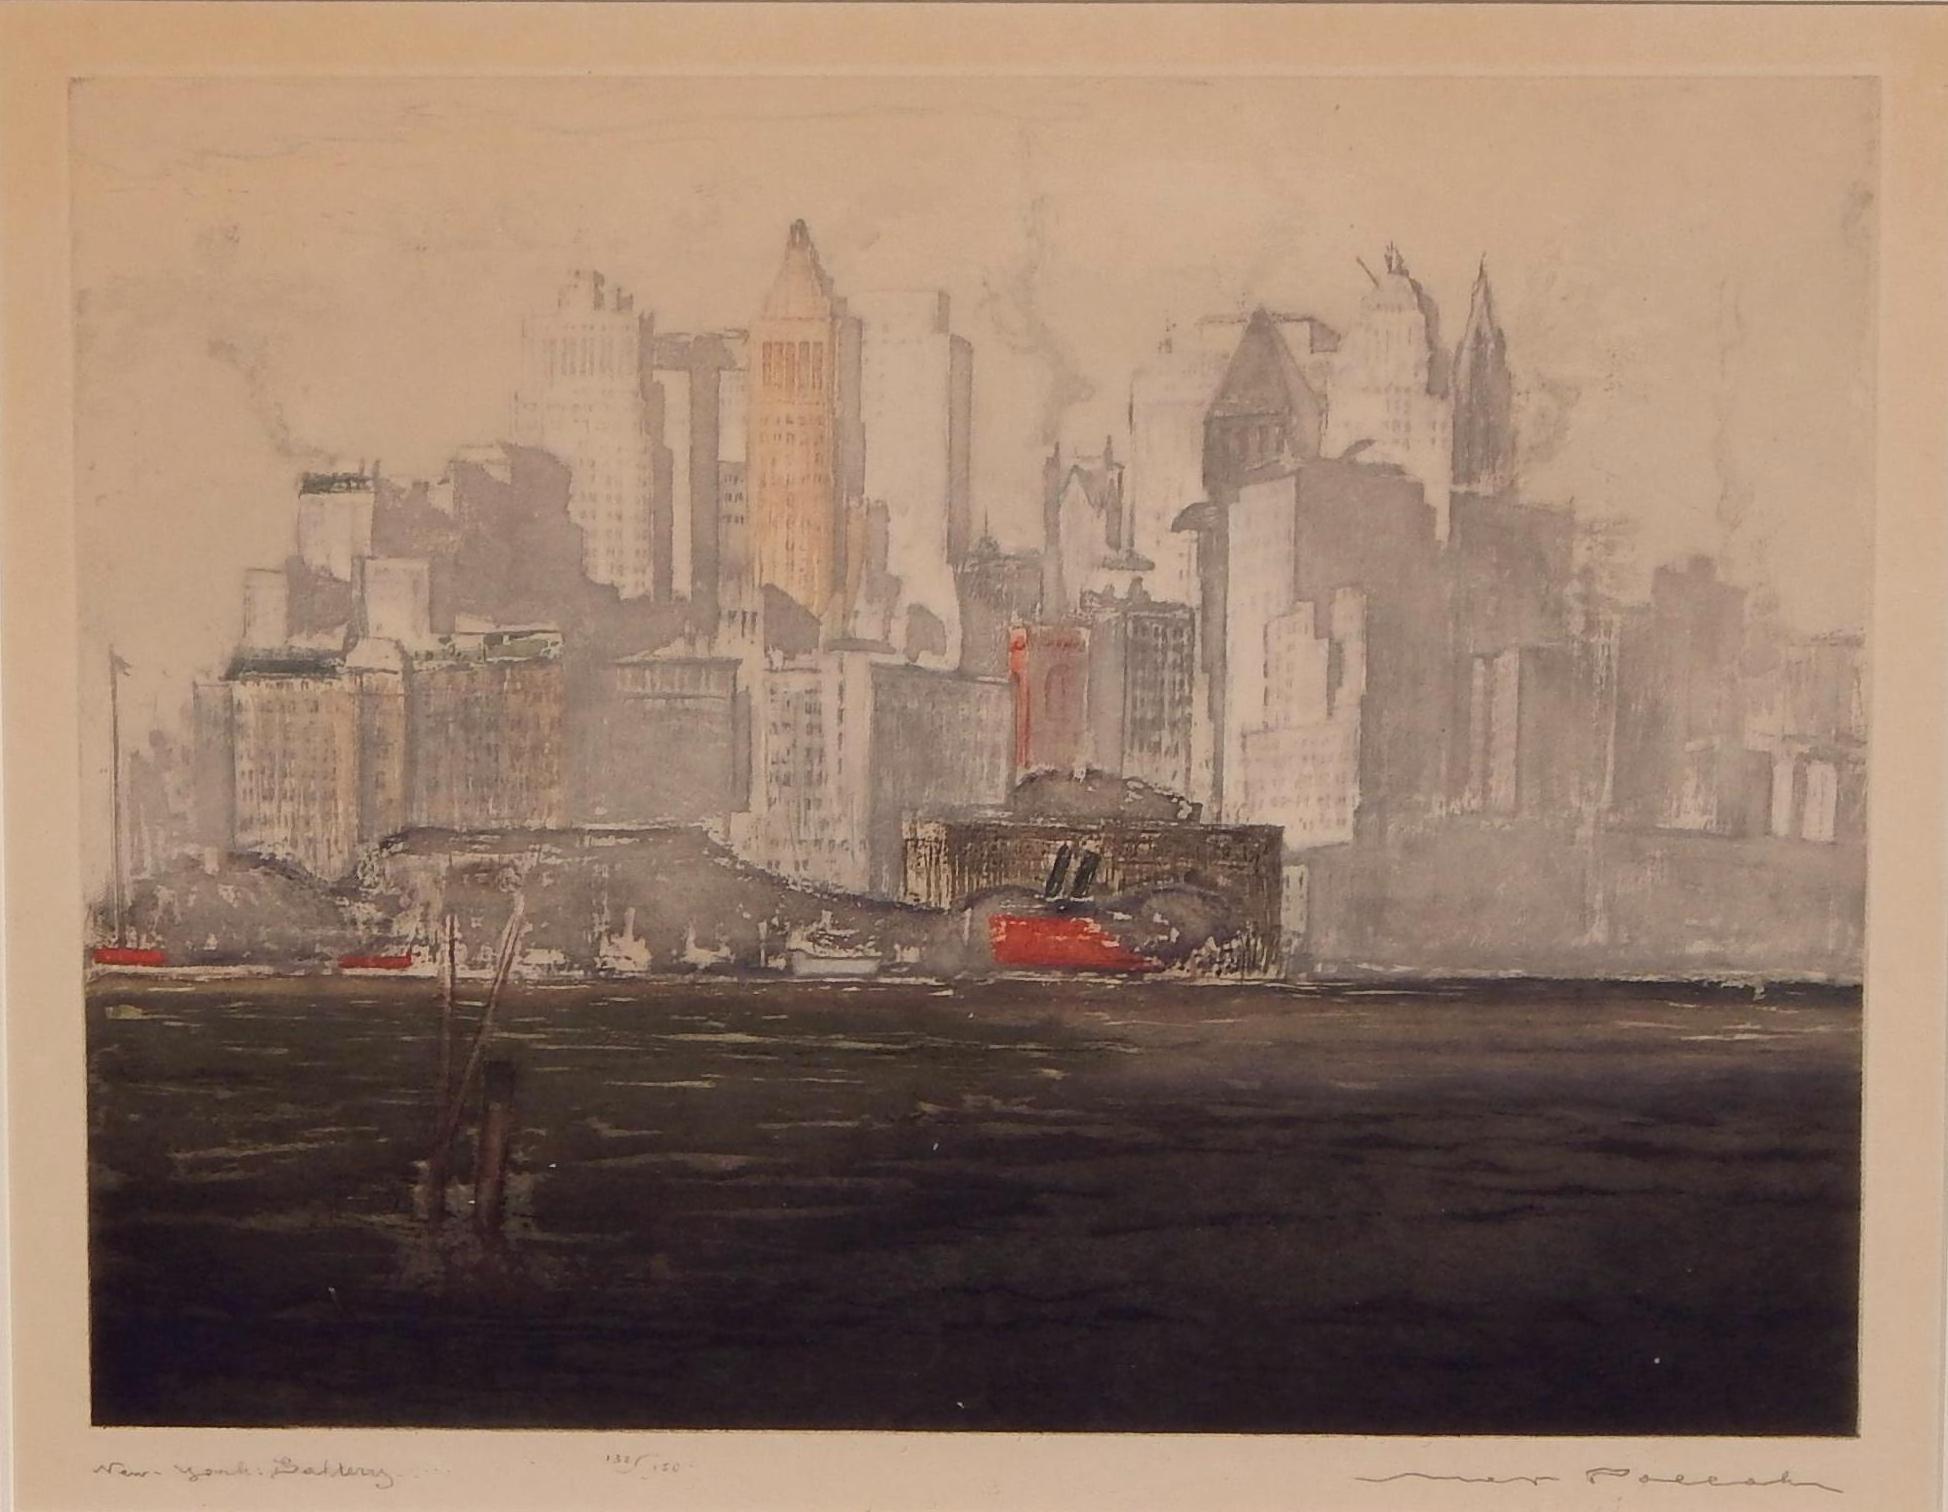 Large color etching and aquatint of New York by Czech/California artist Max Pollak, (1886-1970)
This print is titled 